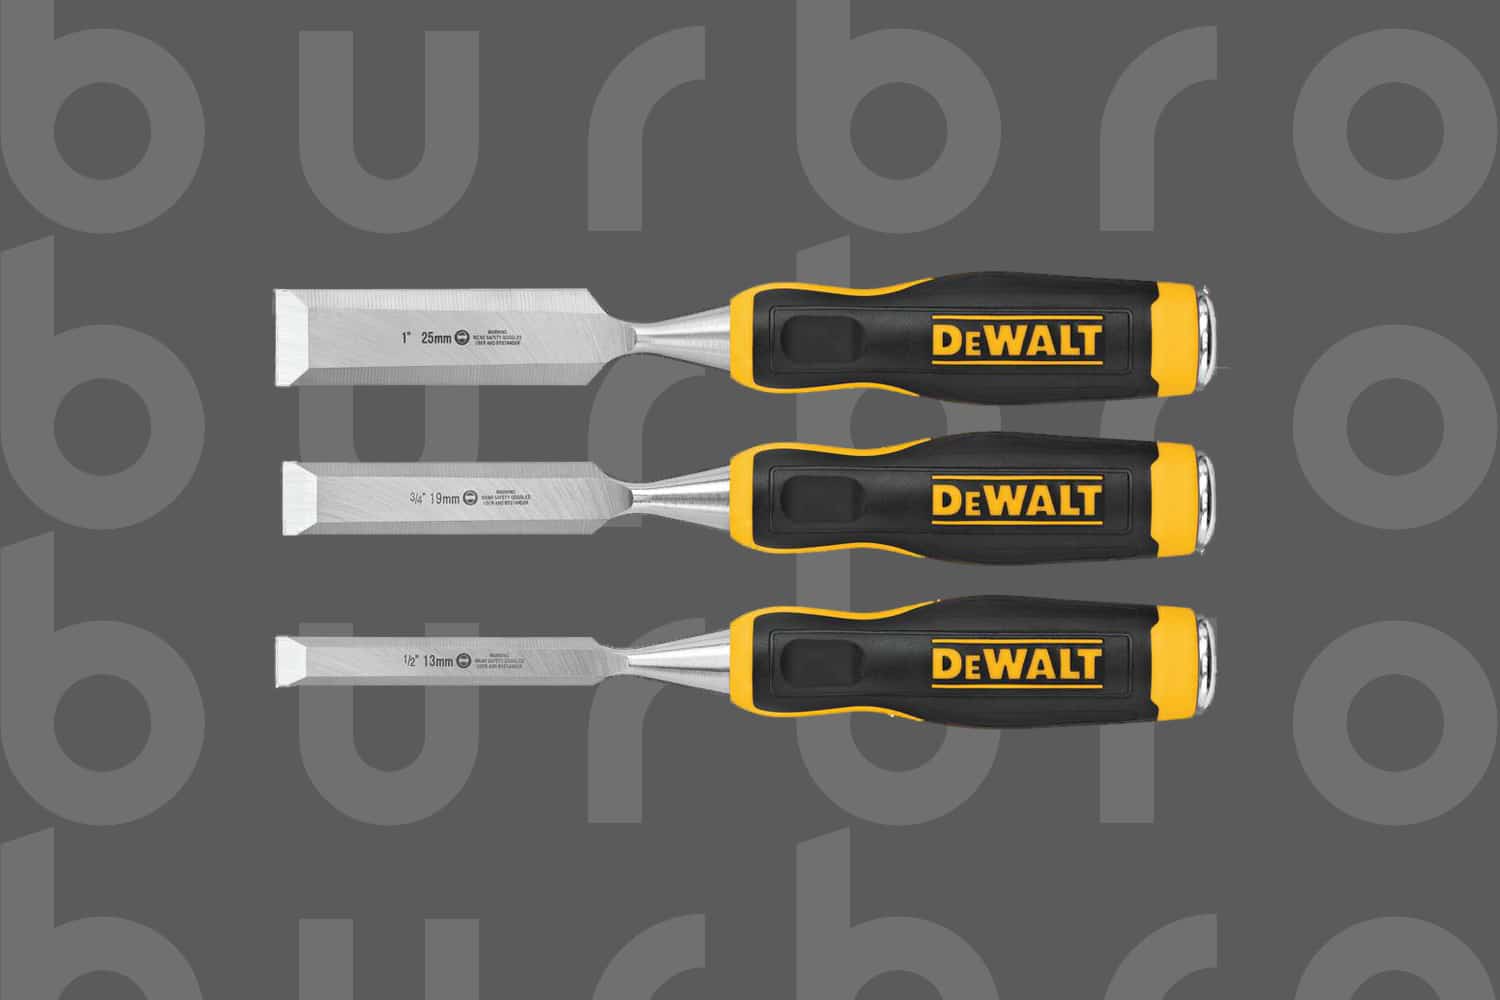 This is the cover photo for our Best Chisel Set article. It features a set of DeWalt Chisels overlaid on a Burbro logo poster-style grey background.